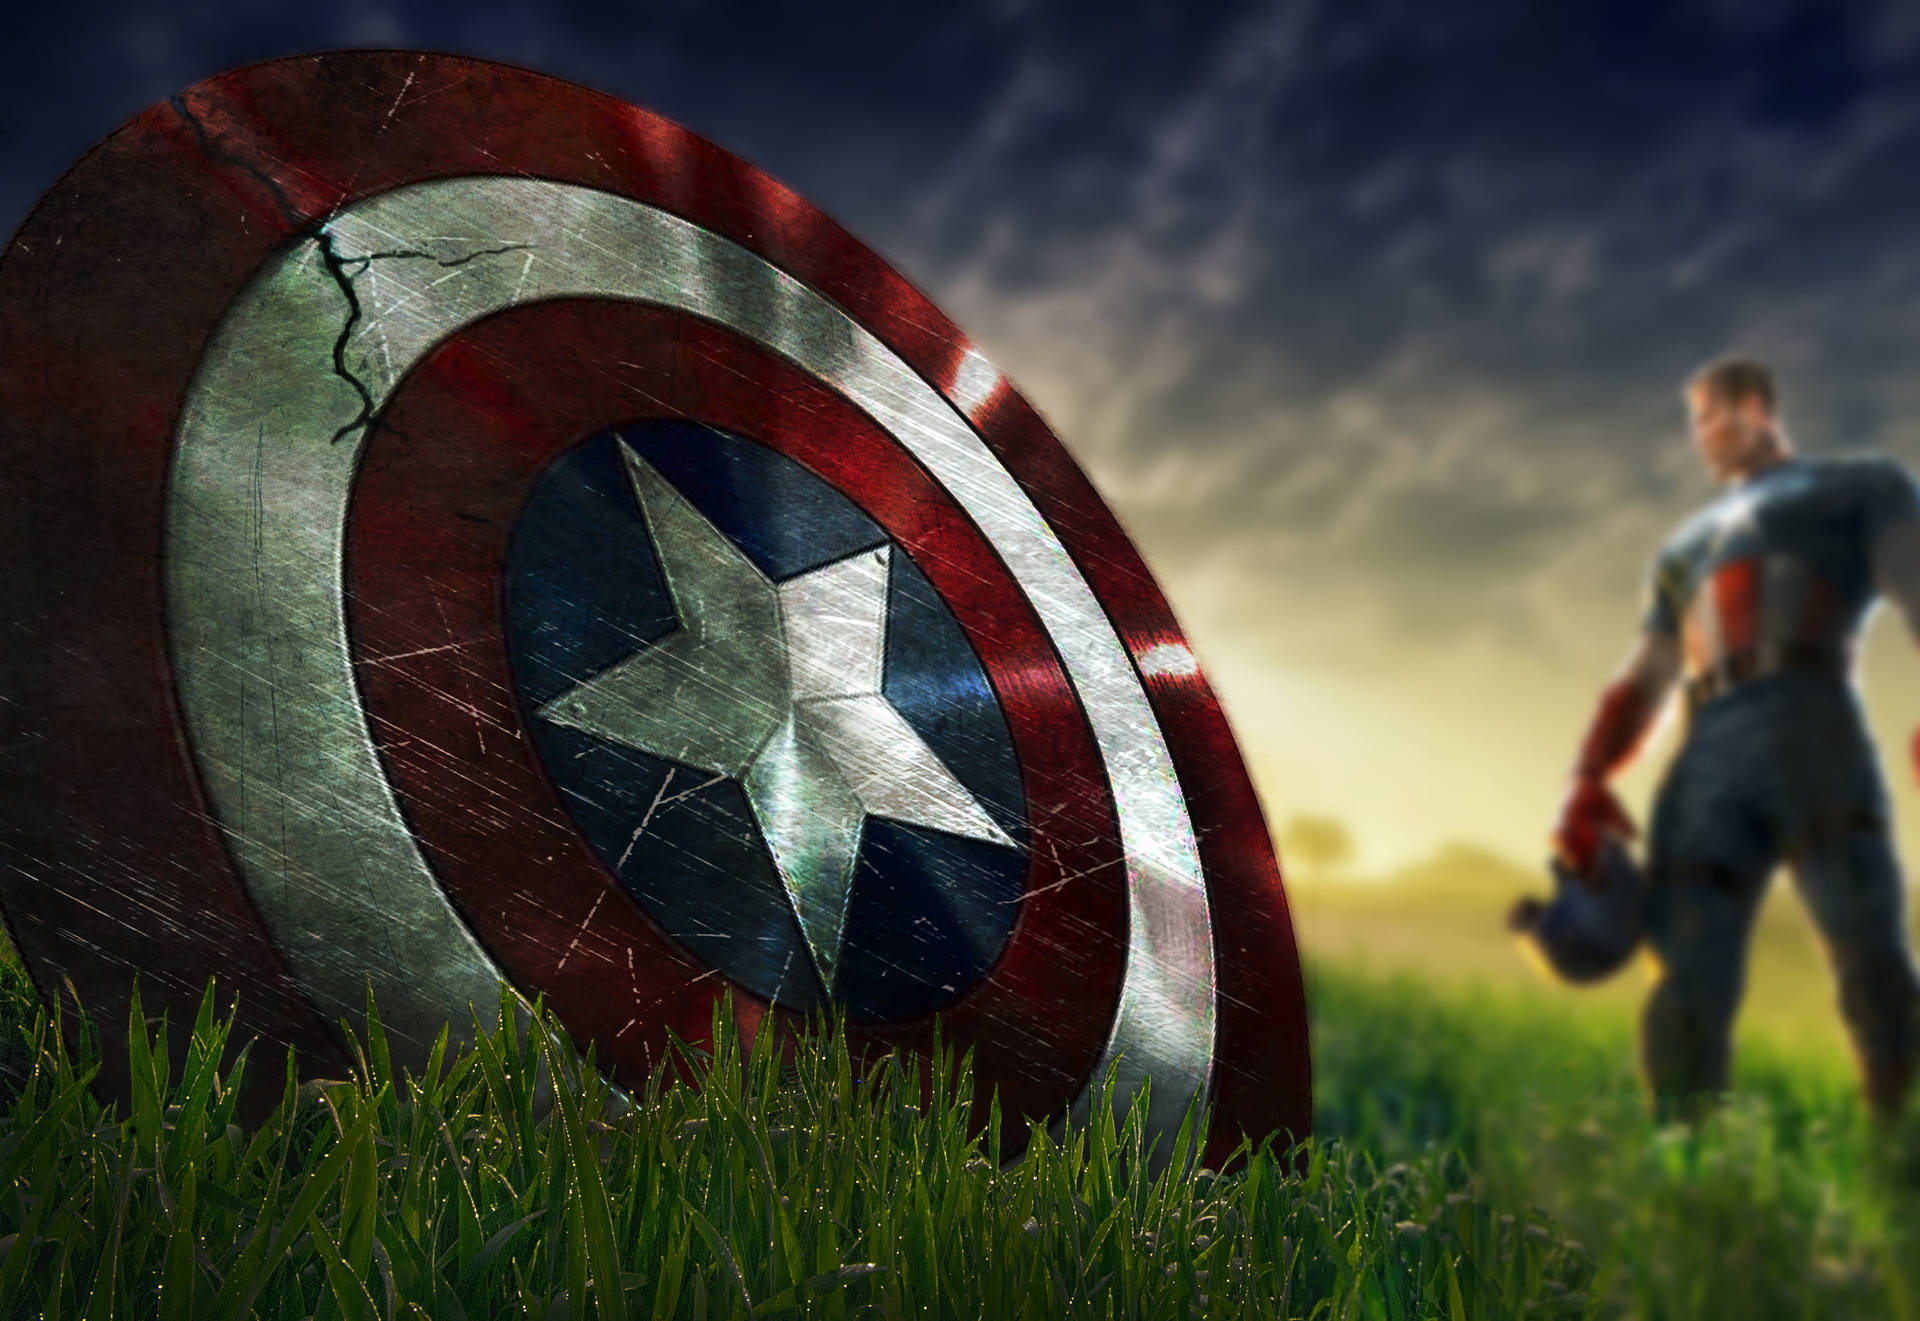 Feel the strength of America with Marvel's Captain America! Wallpaper